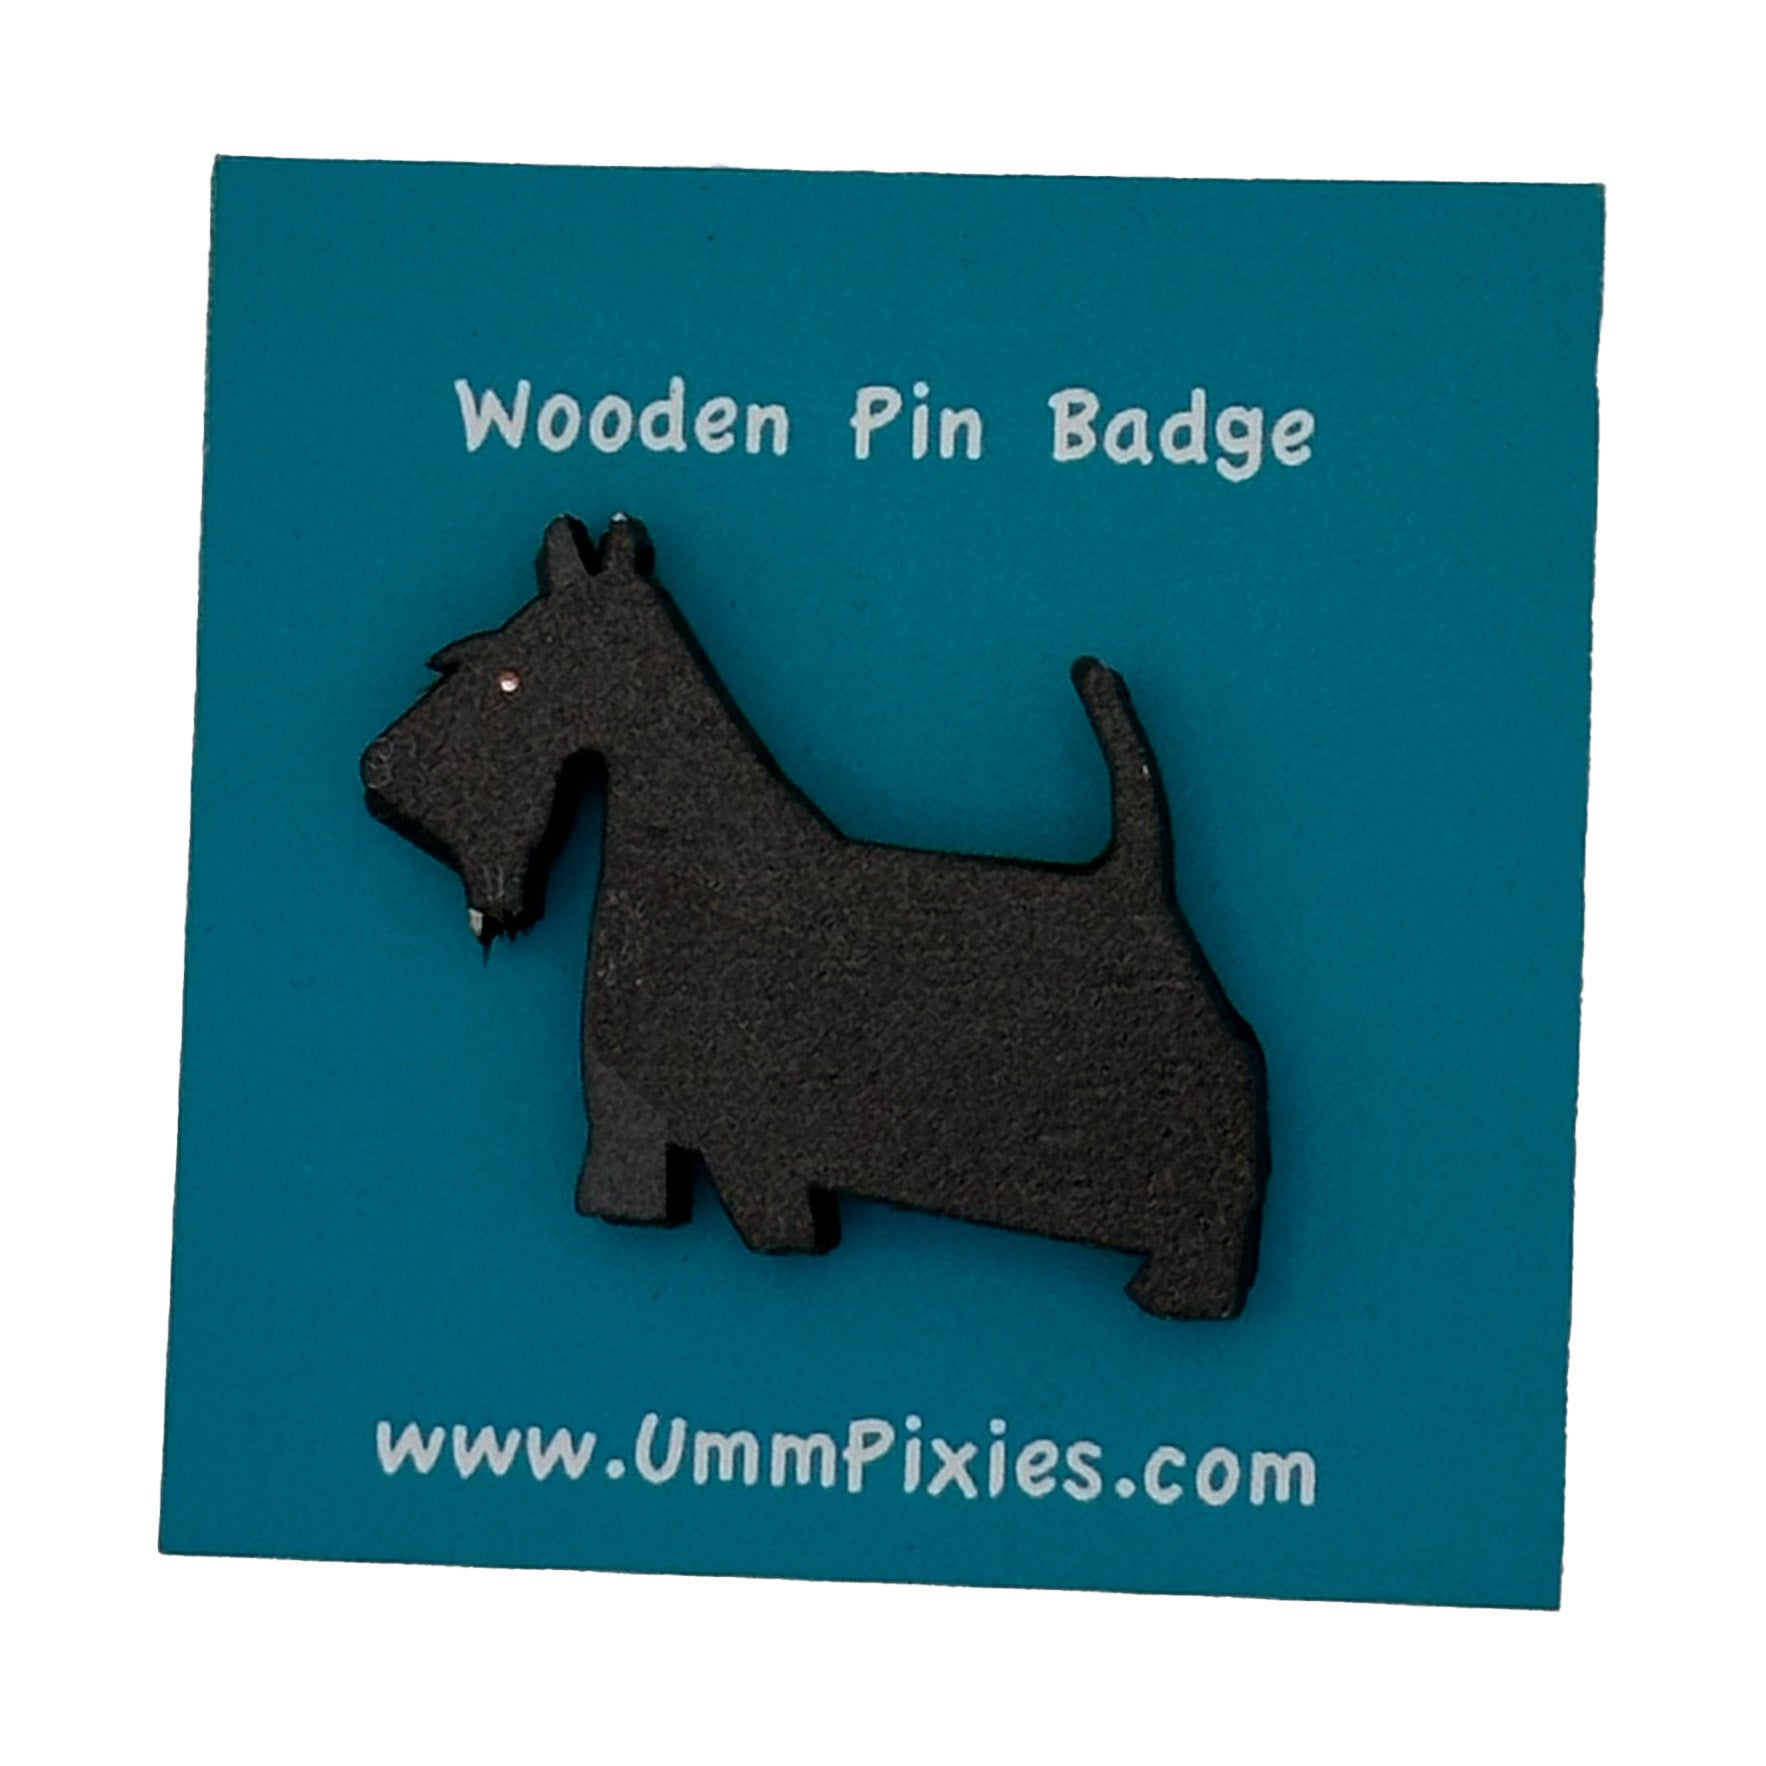 Scottish Terrier Wooden pin badge shown on display card